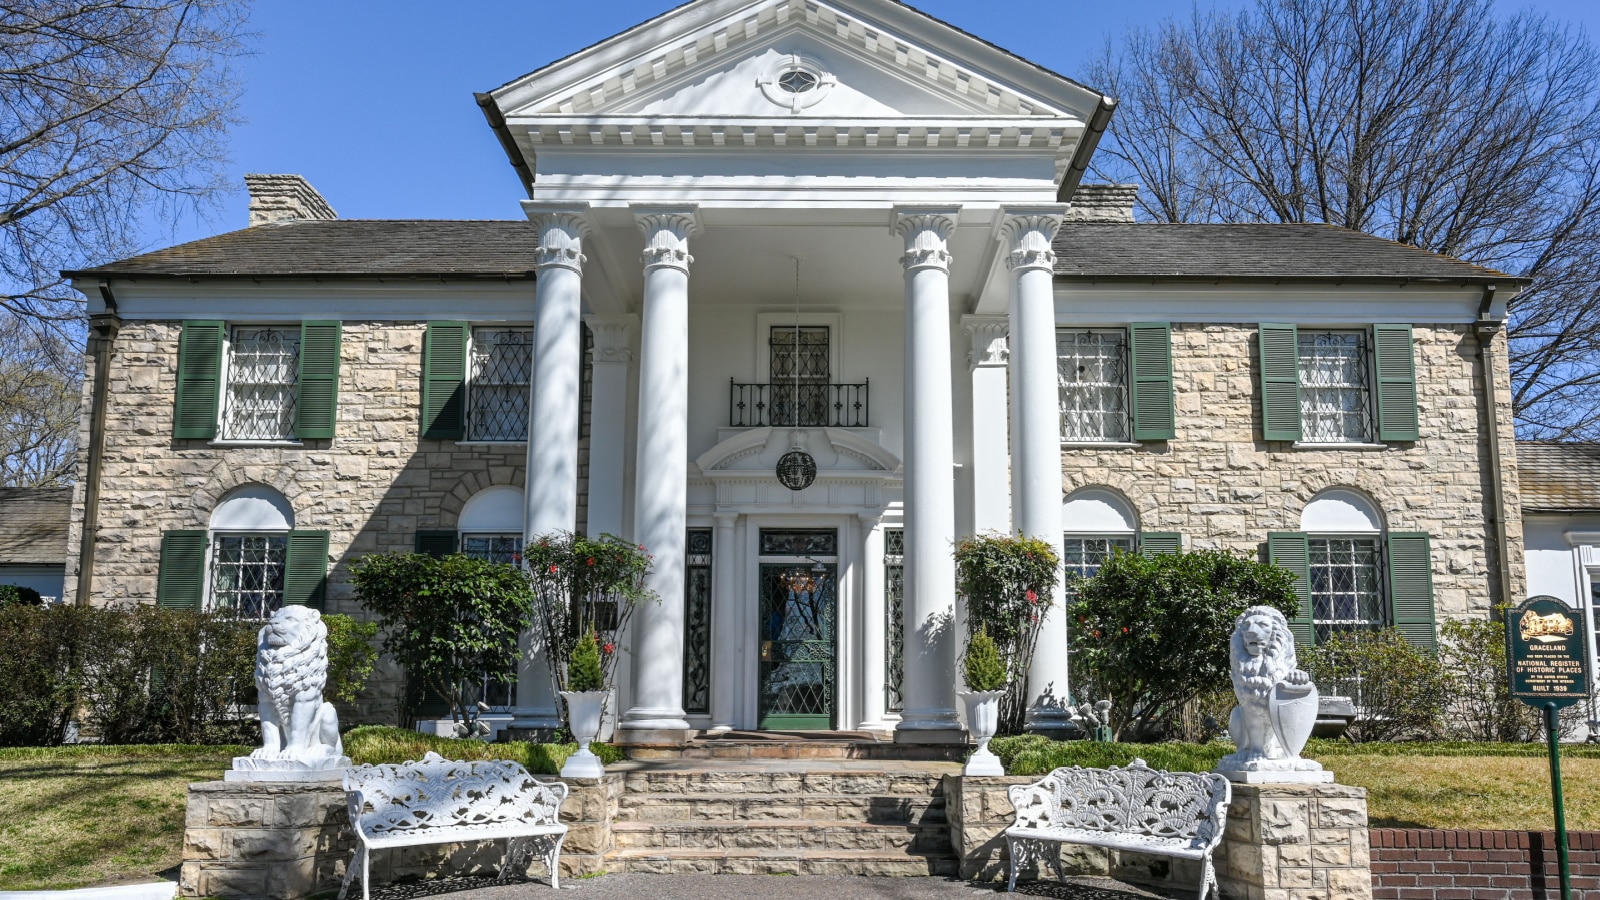 MEMPHIS, TENNESSEE, USA - MARCH 22, 2019: Graceland in Memphis. The mansion was built in 1939 but later bought by Elvis Presley who lived here from 1957 – 1977.